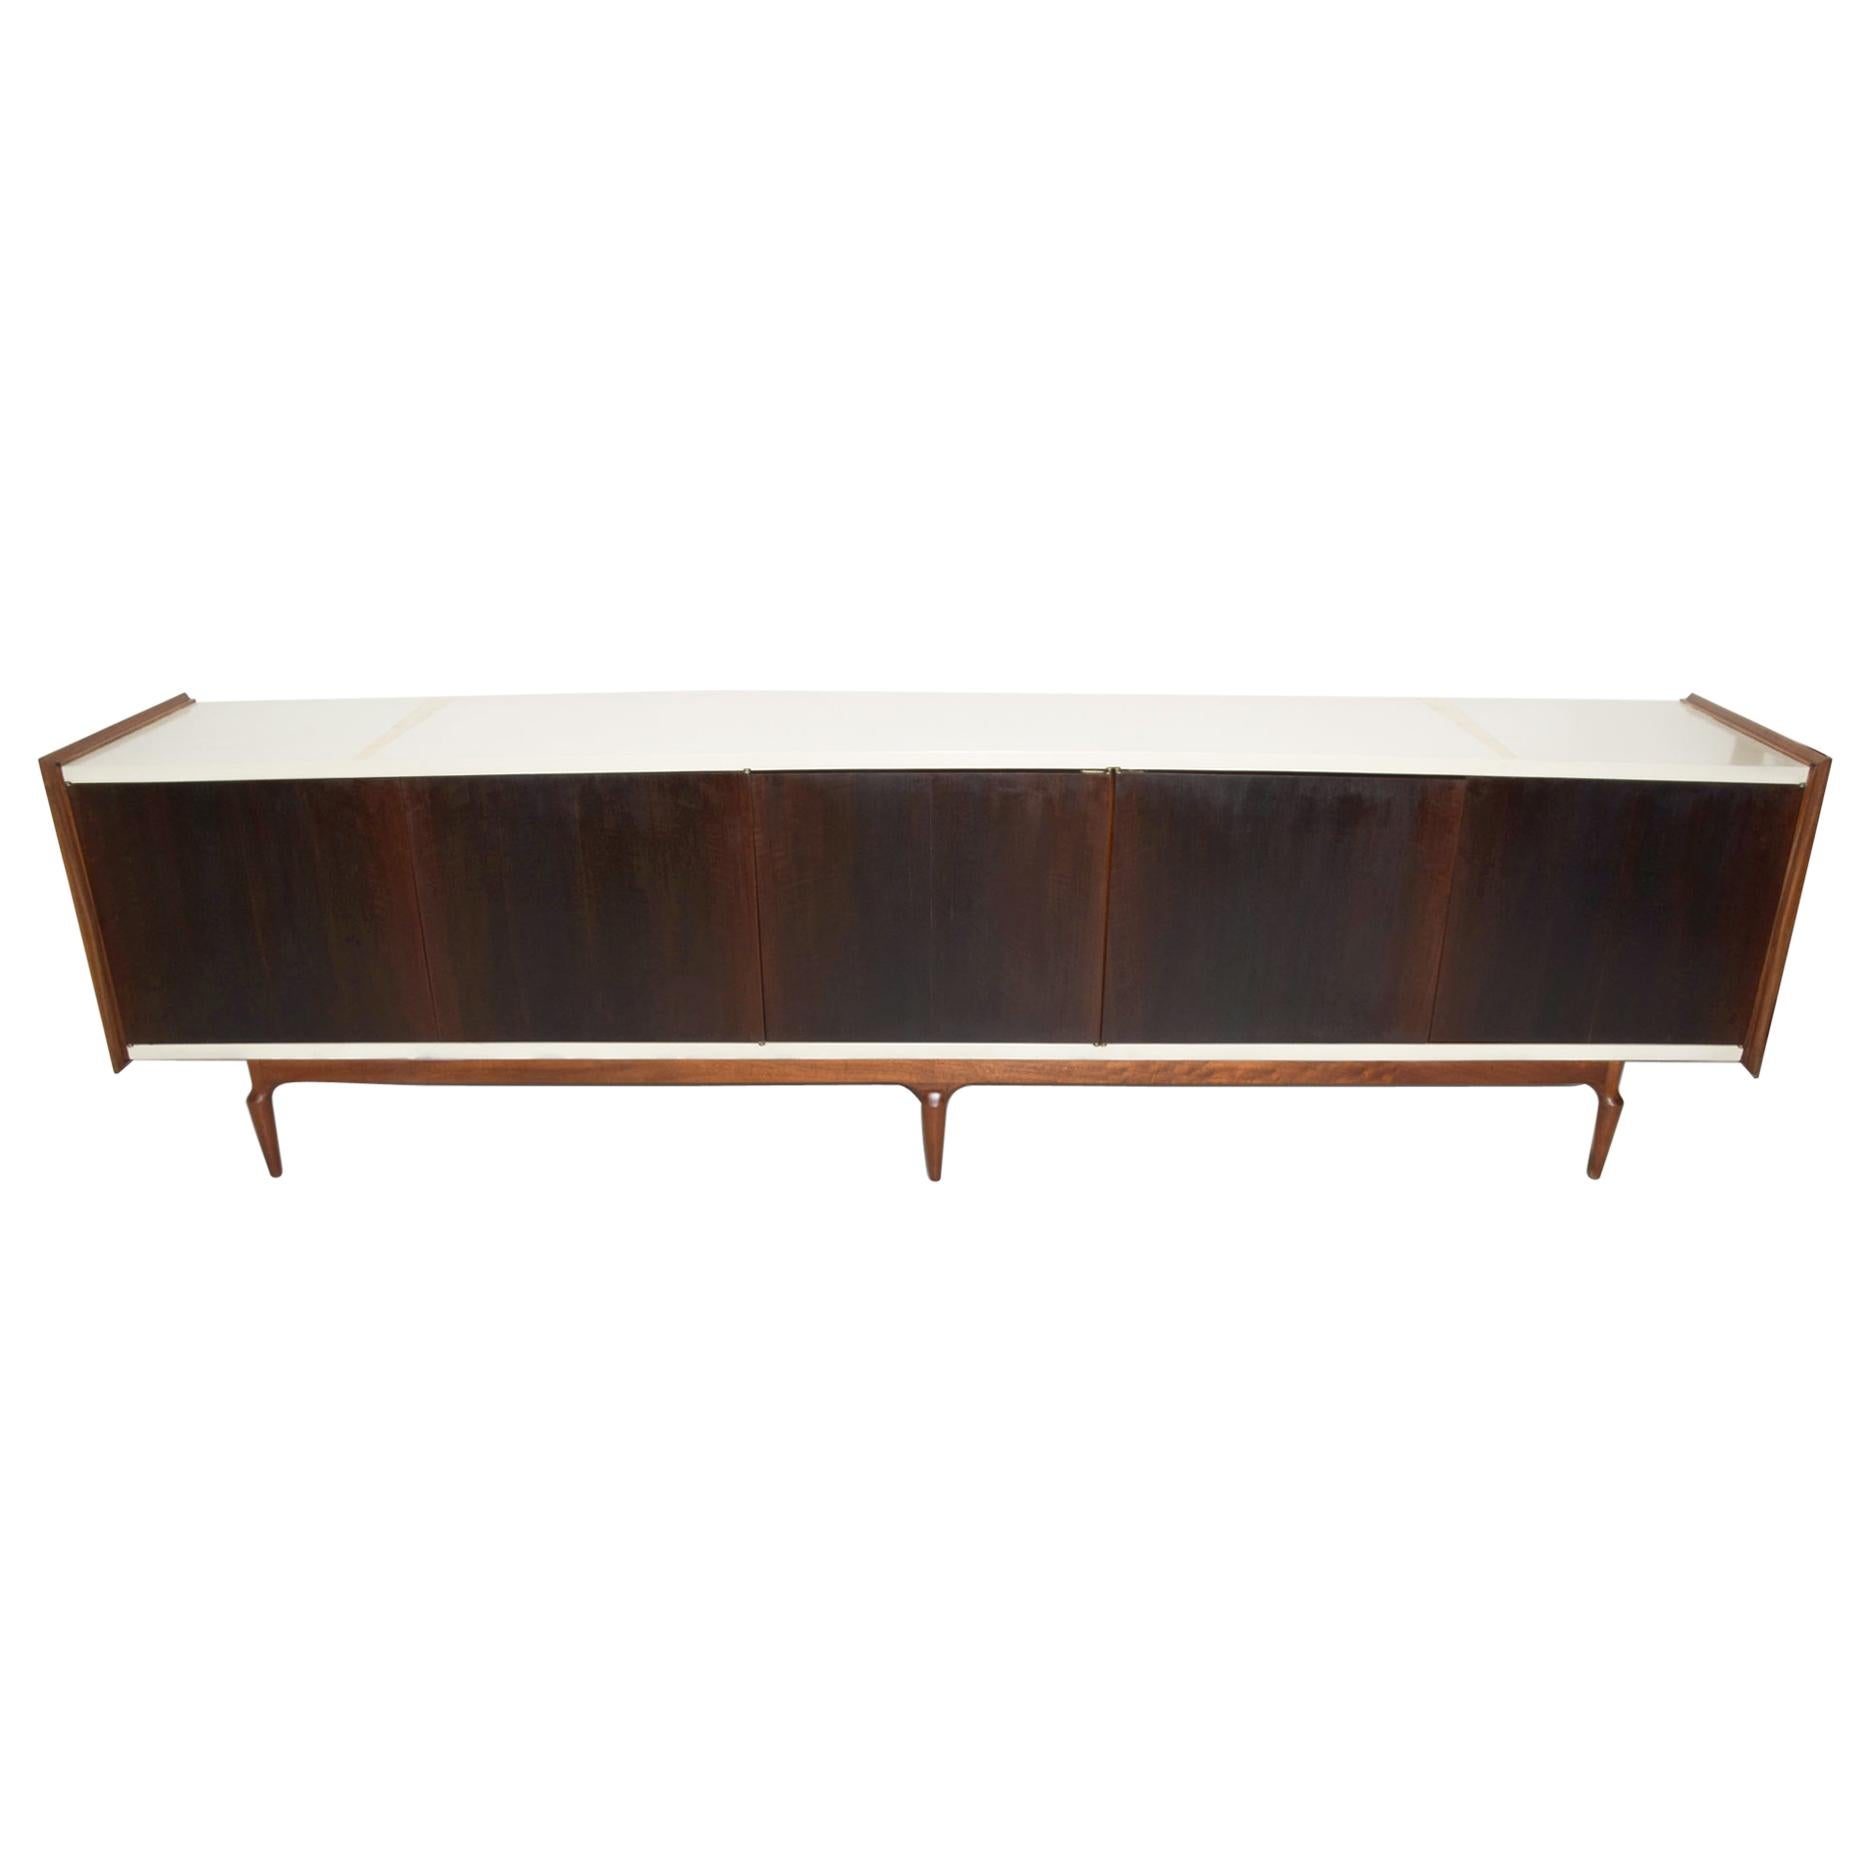 1960s Magnificently Long Credenza Two Tone Lacquer & Wood Monterrey, Mexico